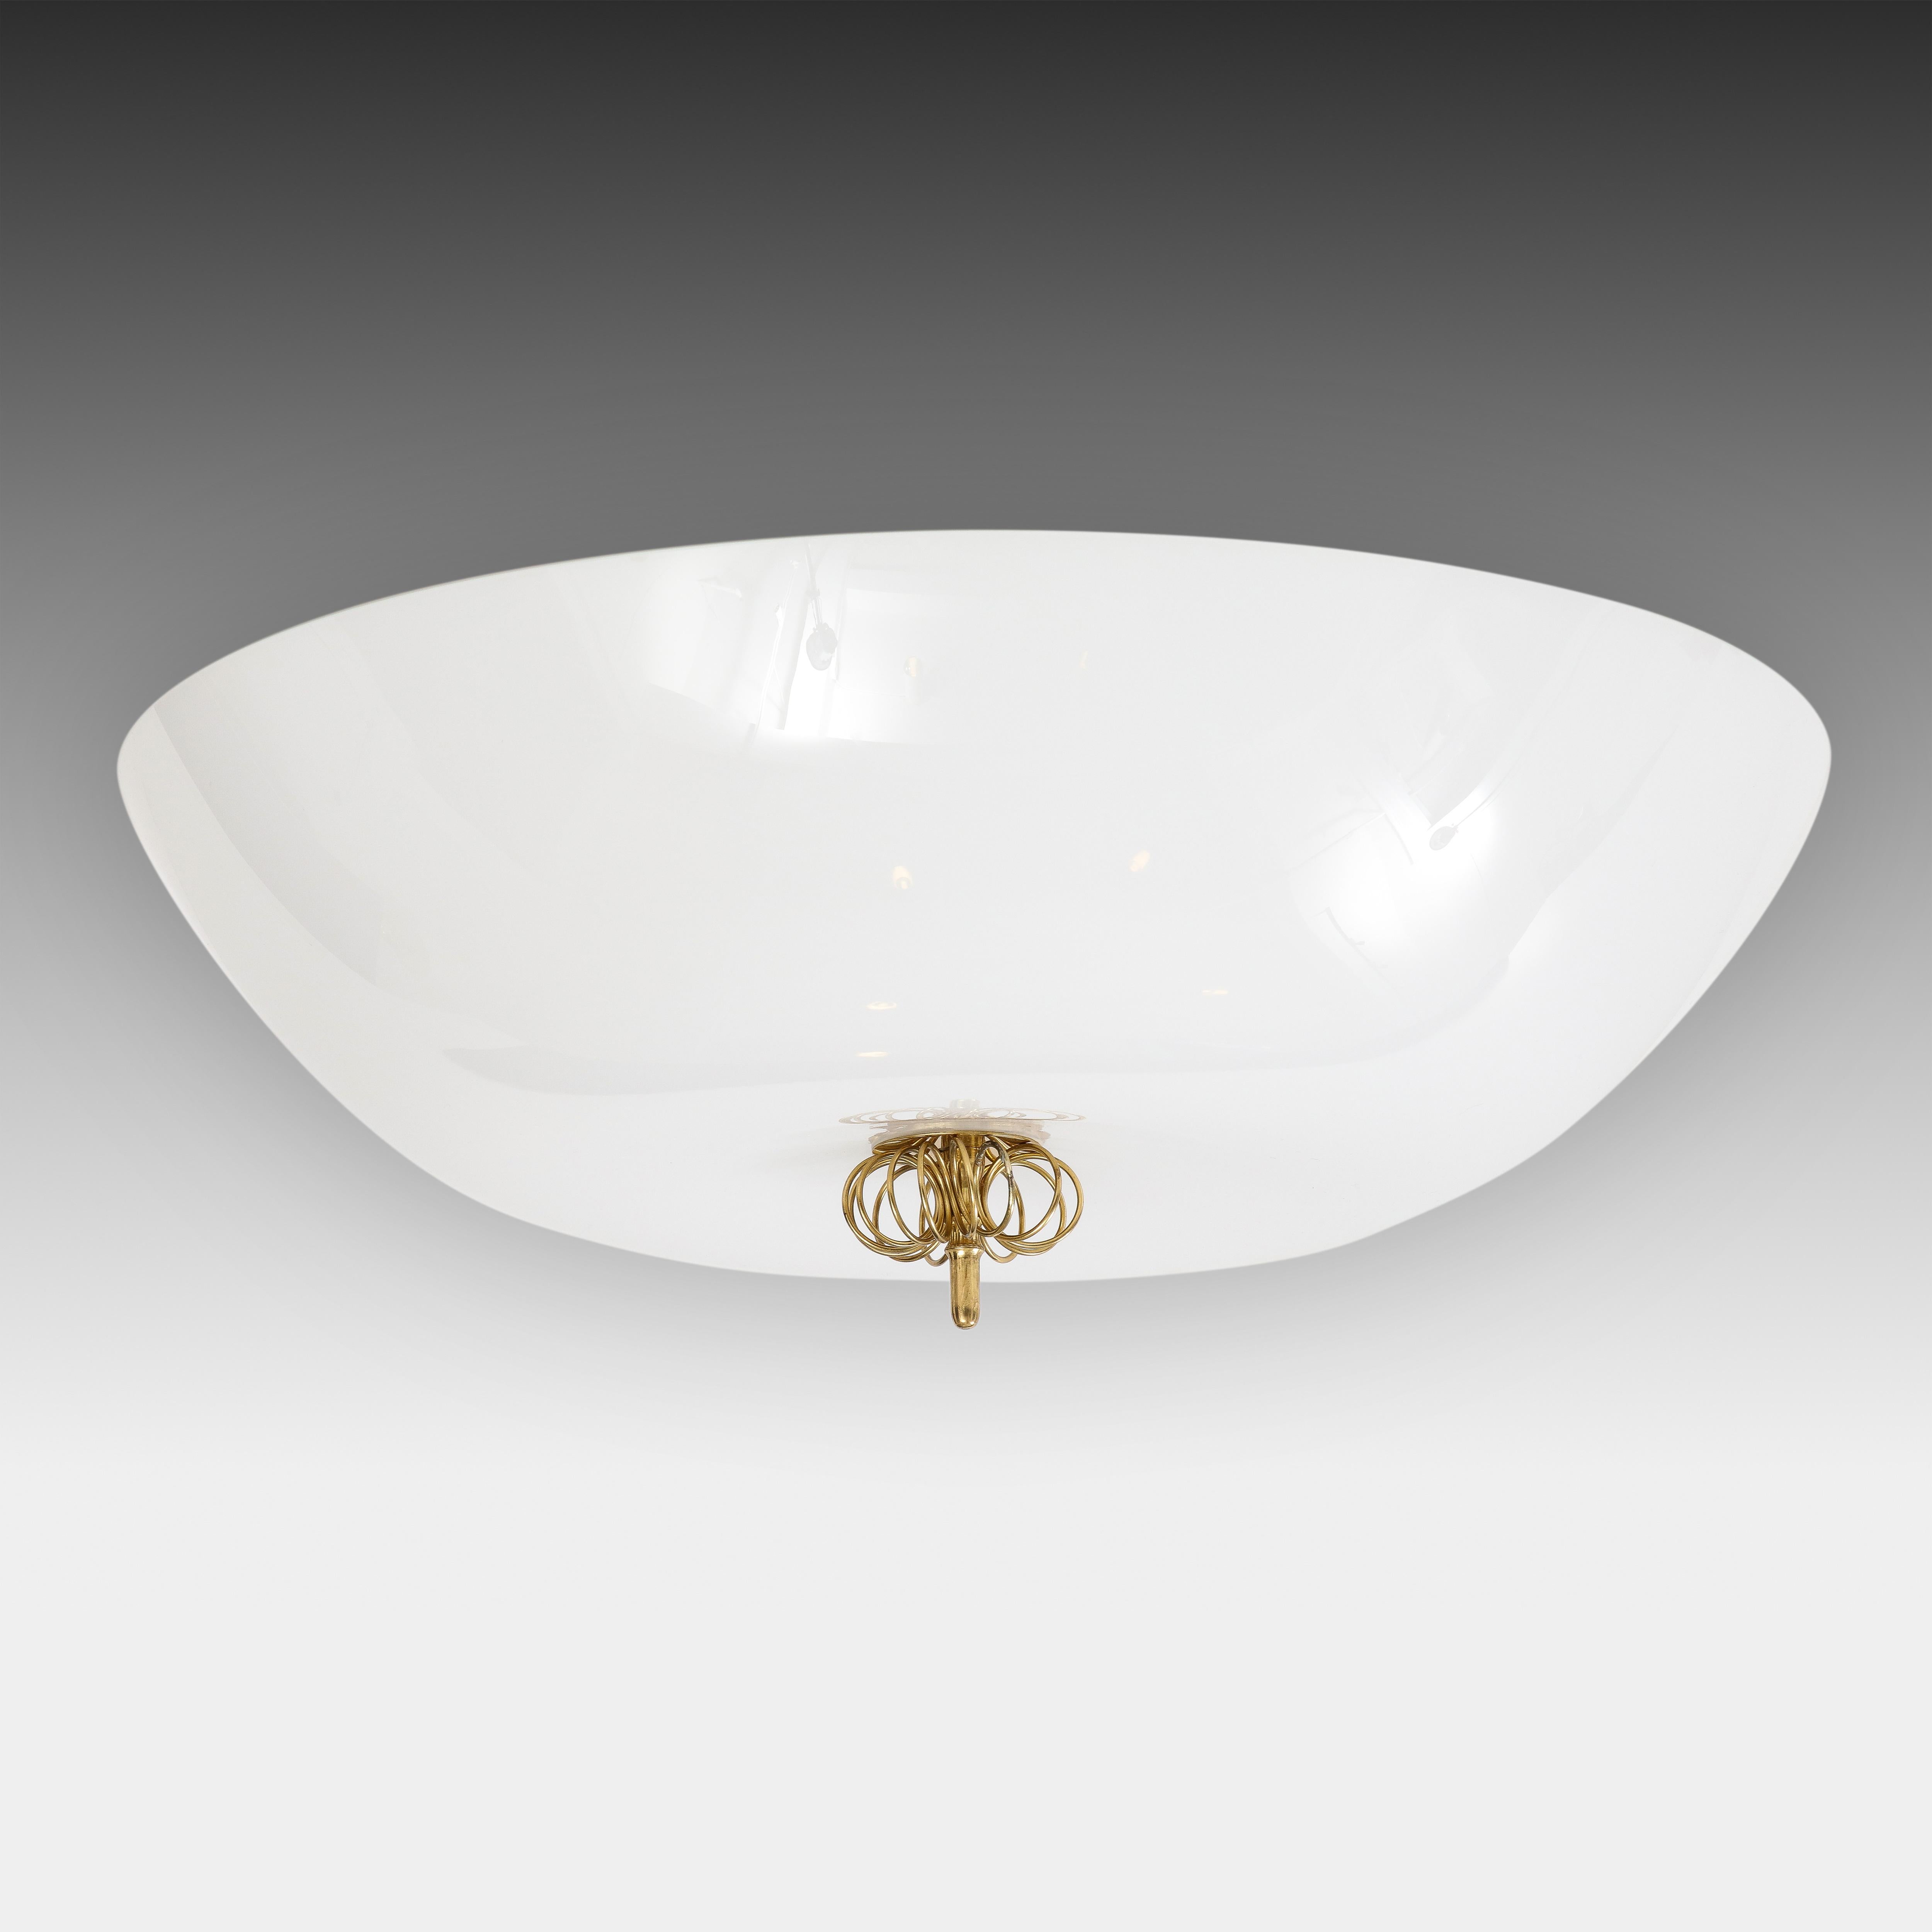 Mid-20th Century Paavo Tynell Rare Flush Mount Ceiling Lights Model 2093, Finland, 1950s For Sale